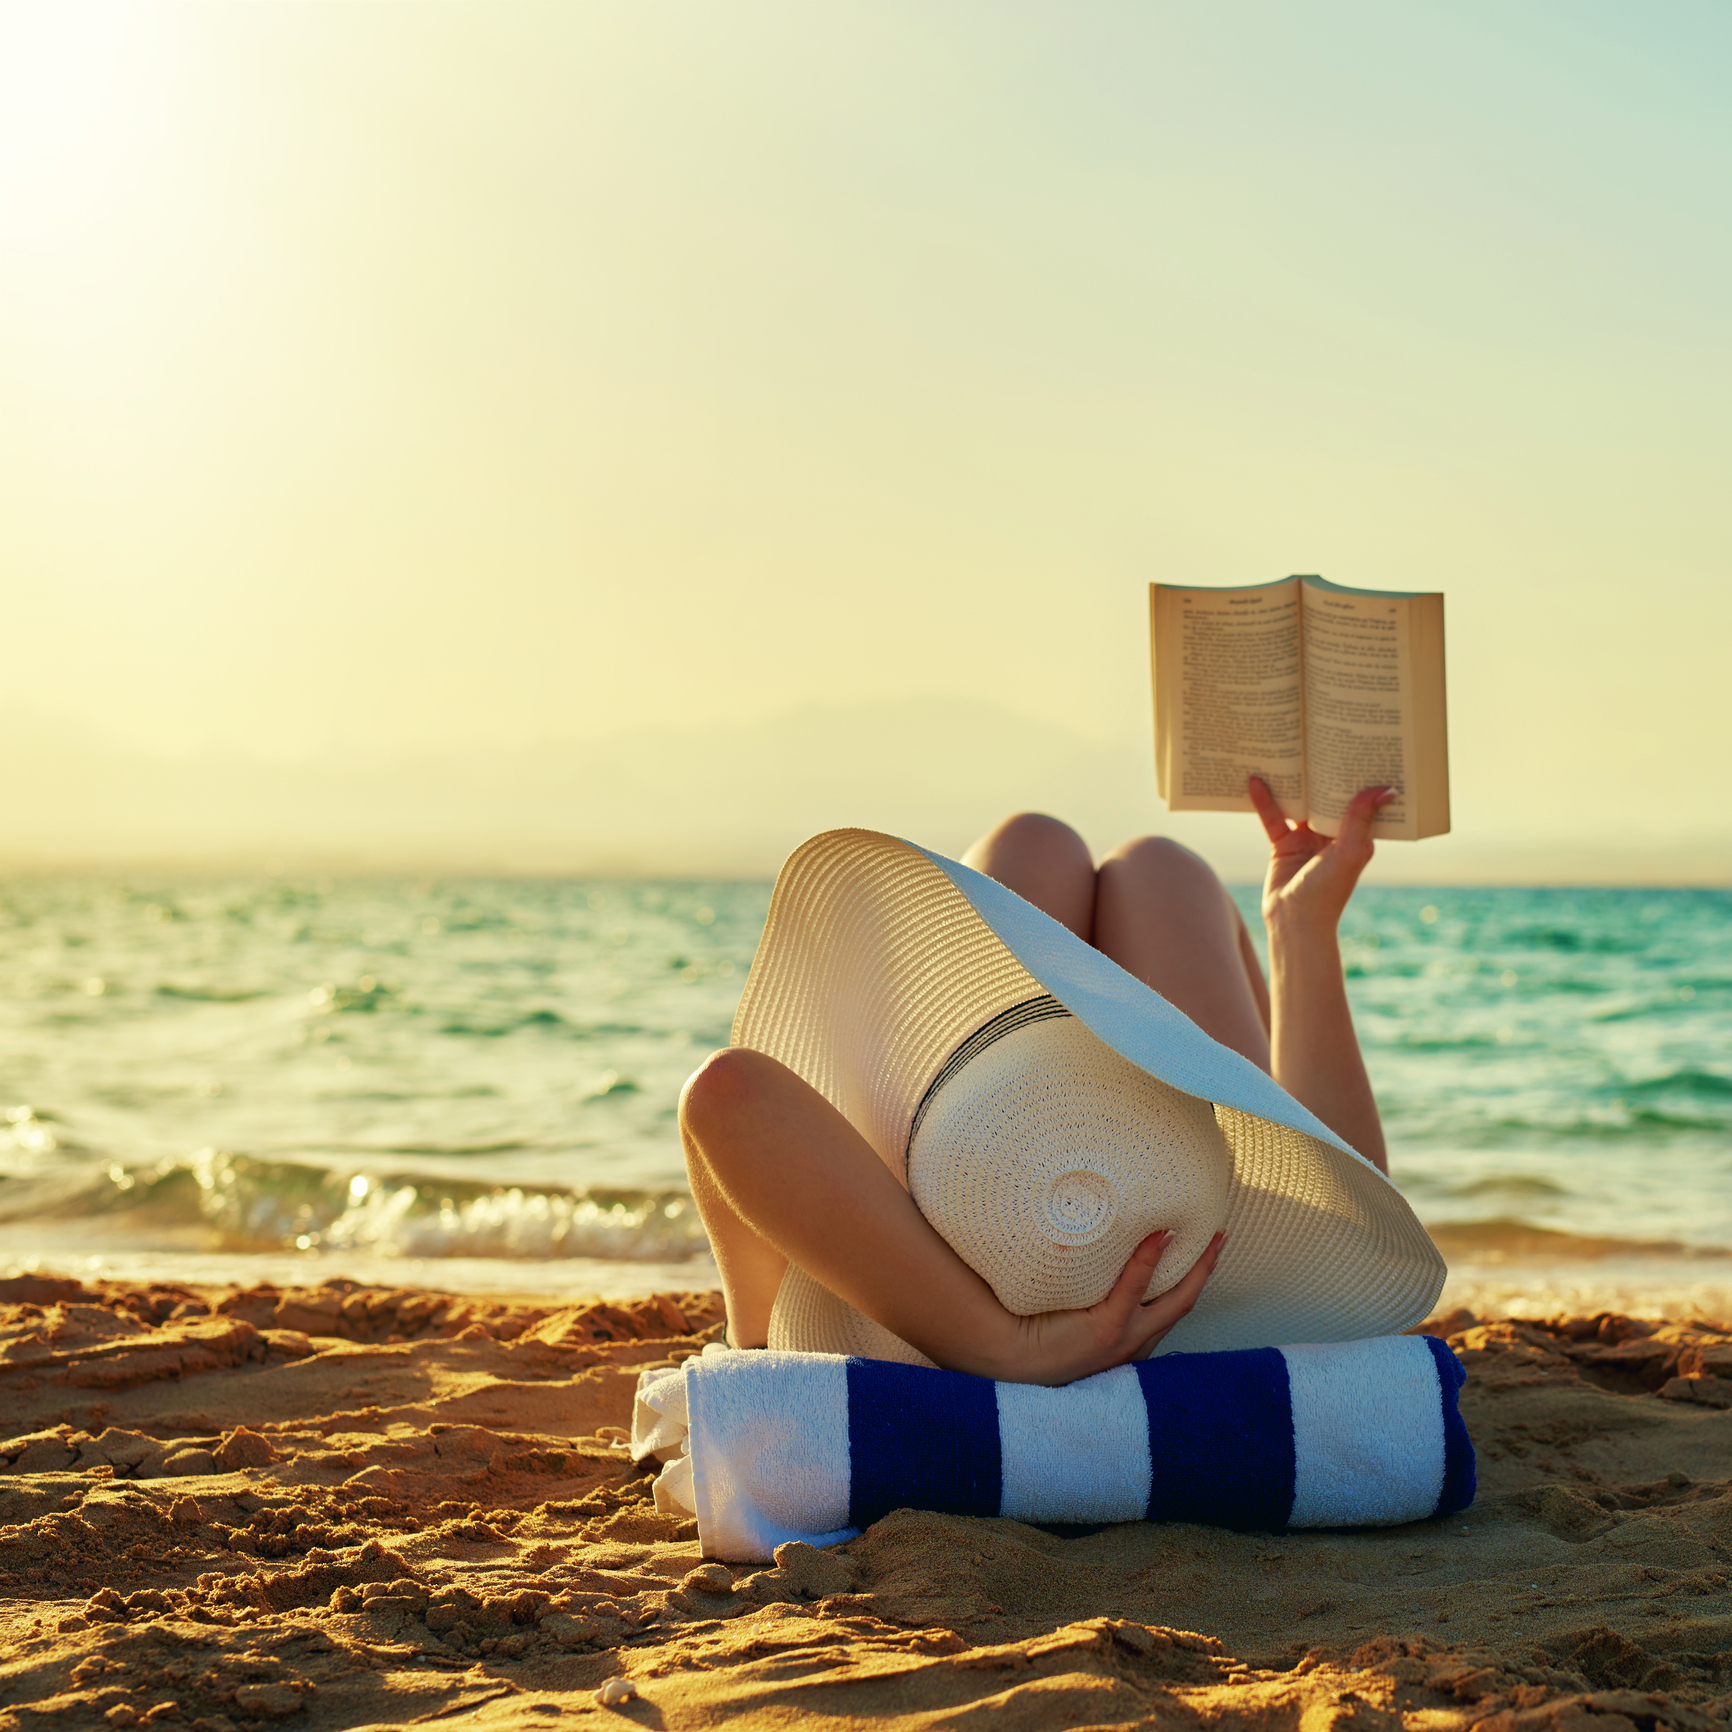 3 day weekend reading relaxation success tips